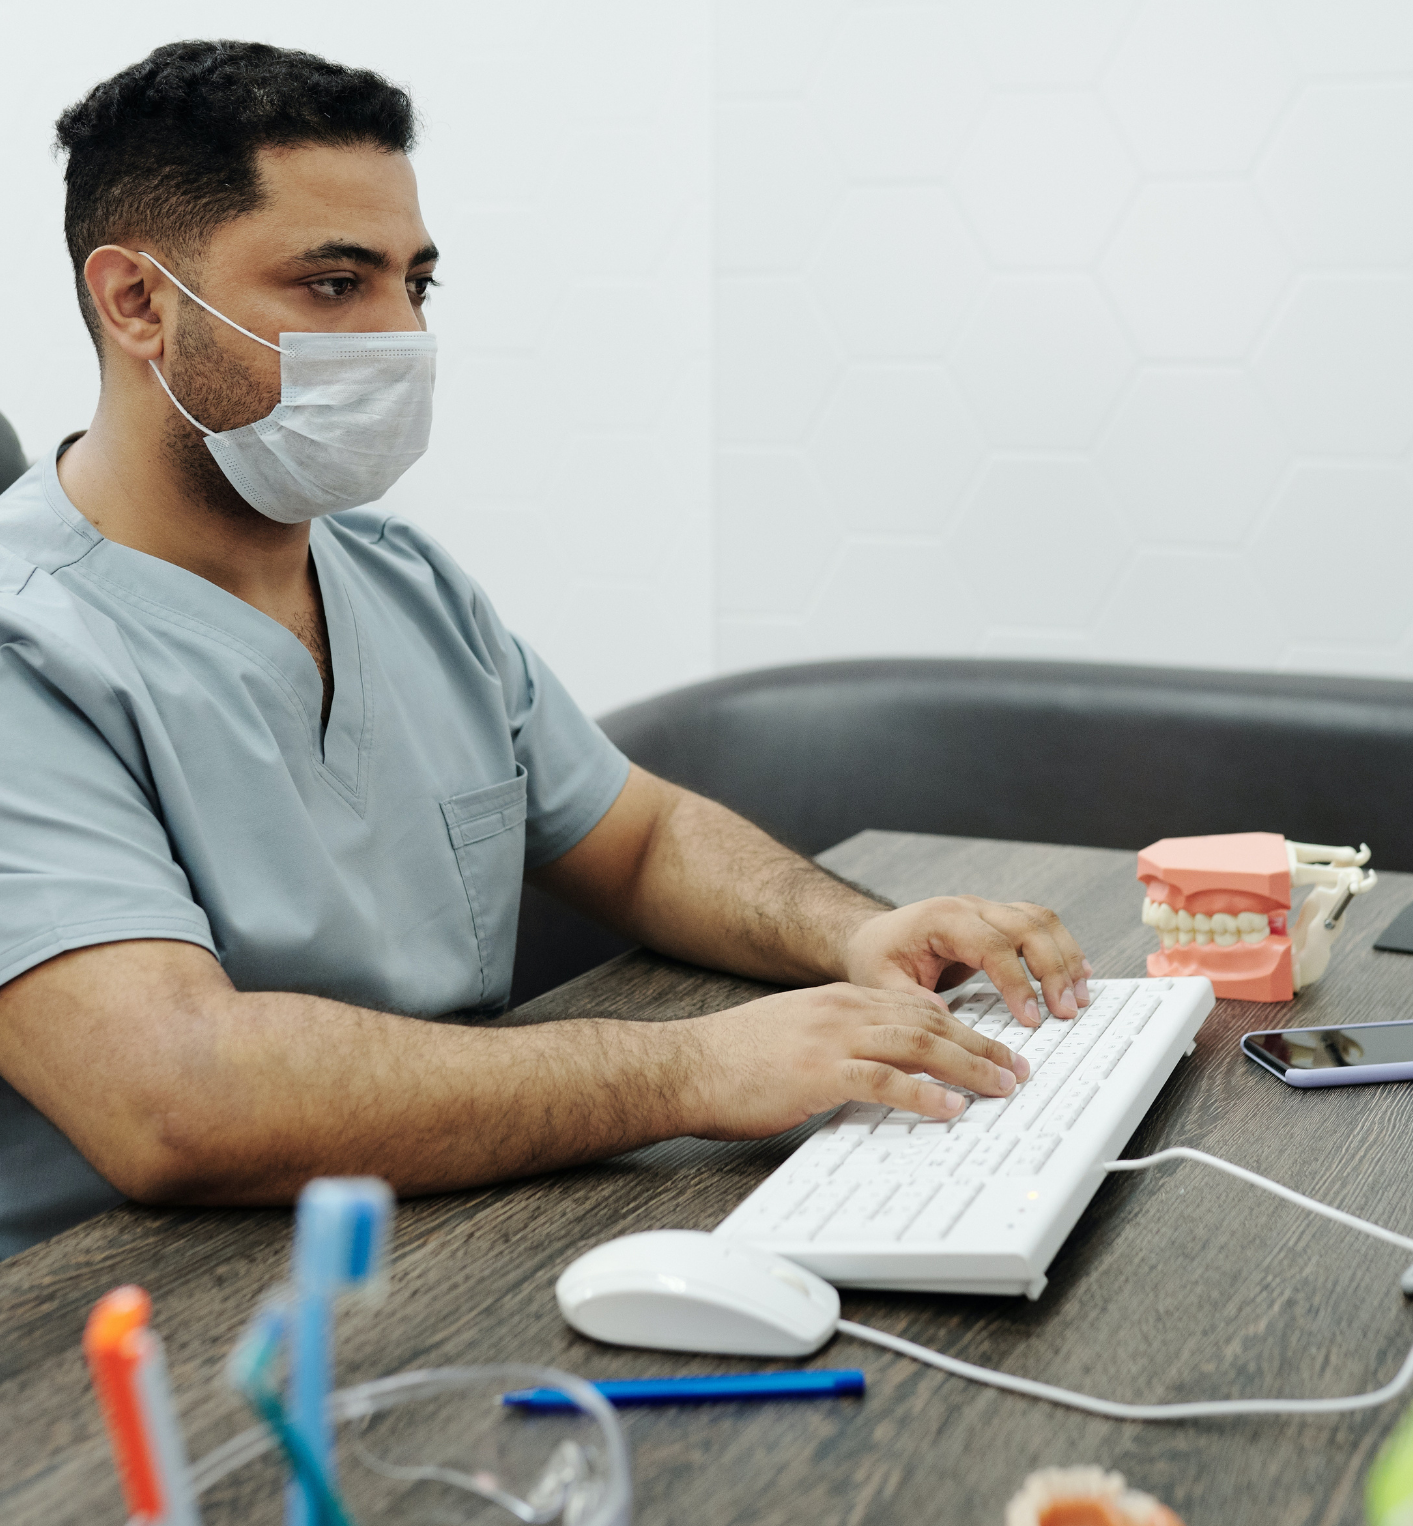 Dentist in facemask sitting down at desk typing on a computer